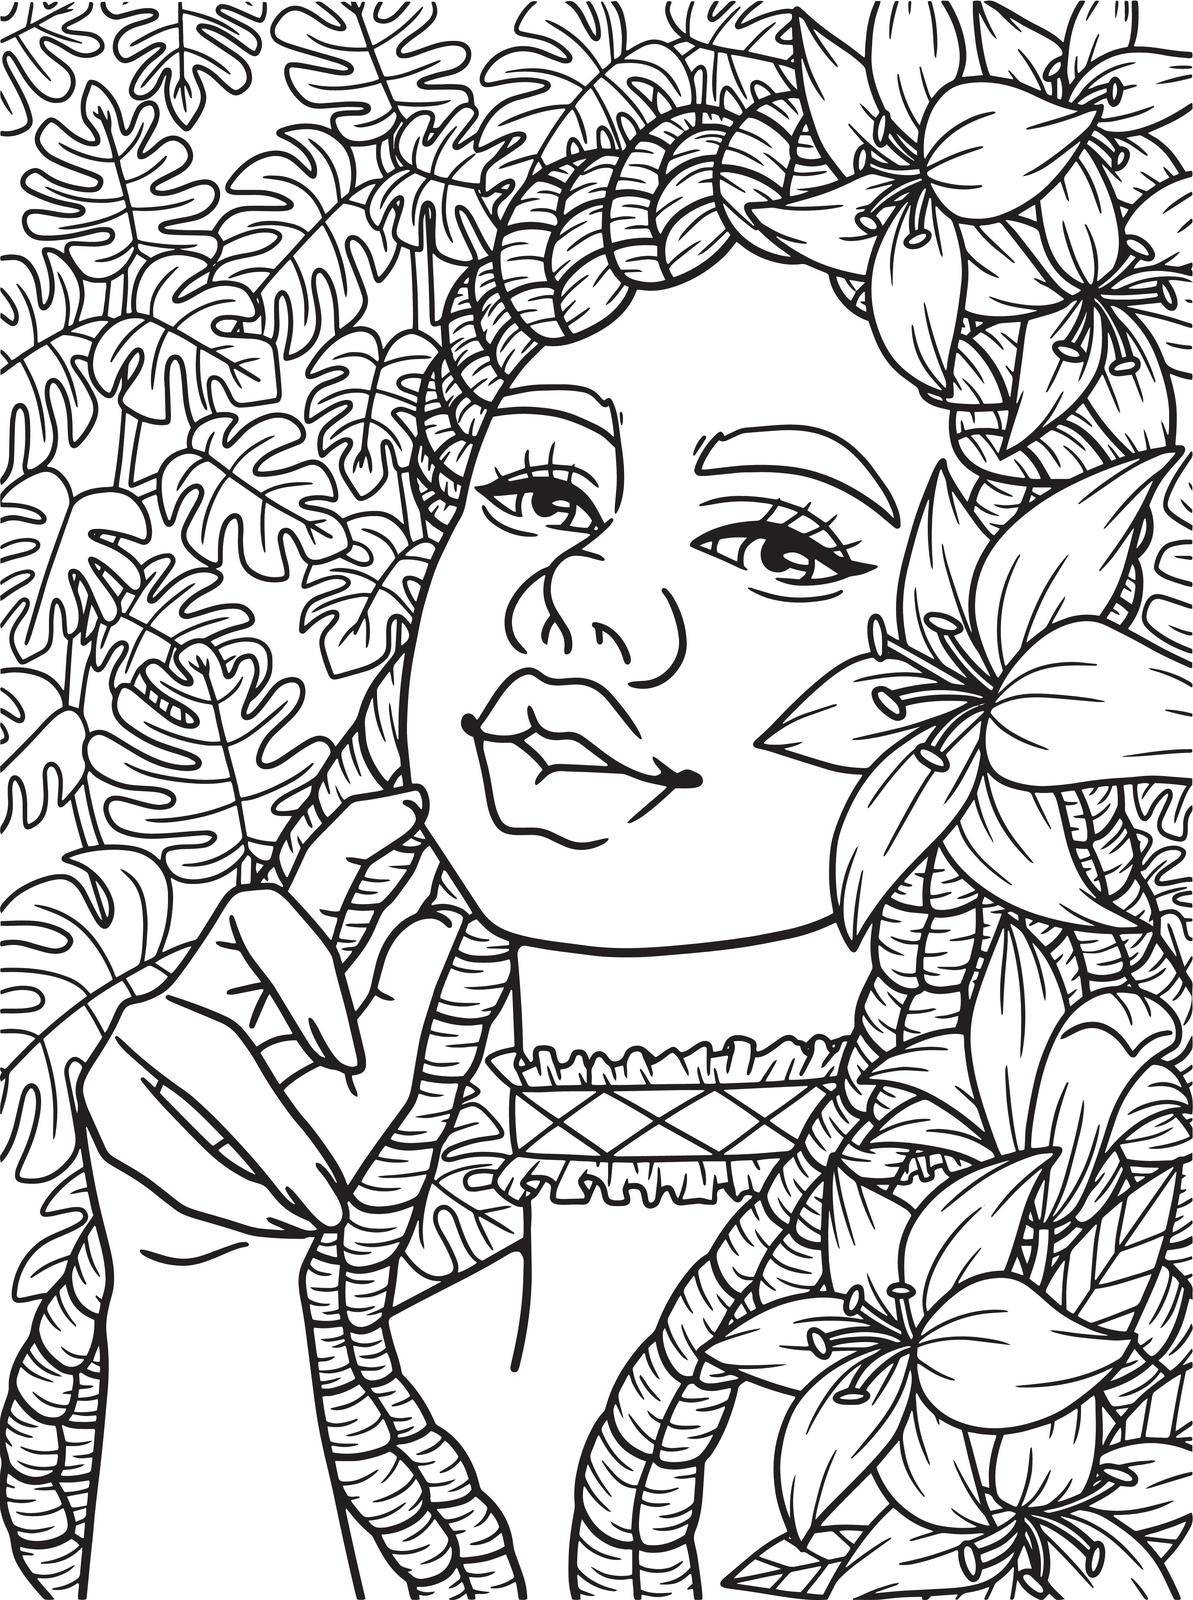 Afro American Flower Girl Adult Coloring by abbydesign